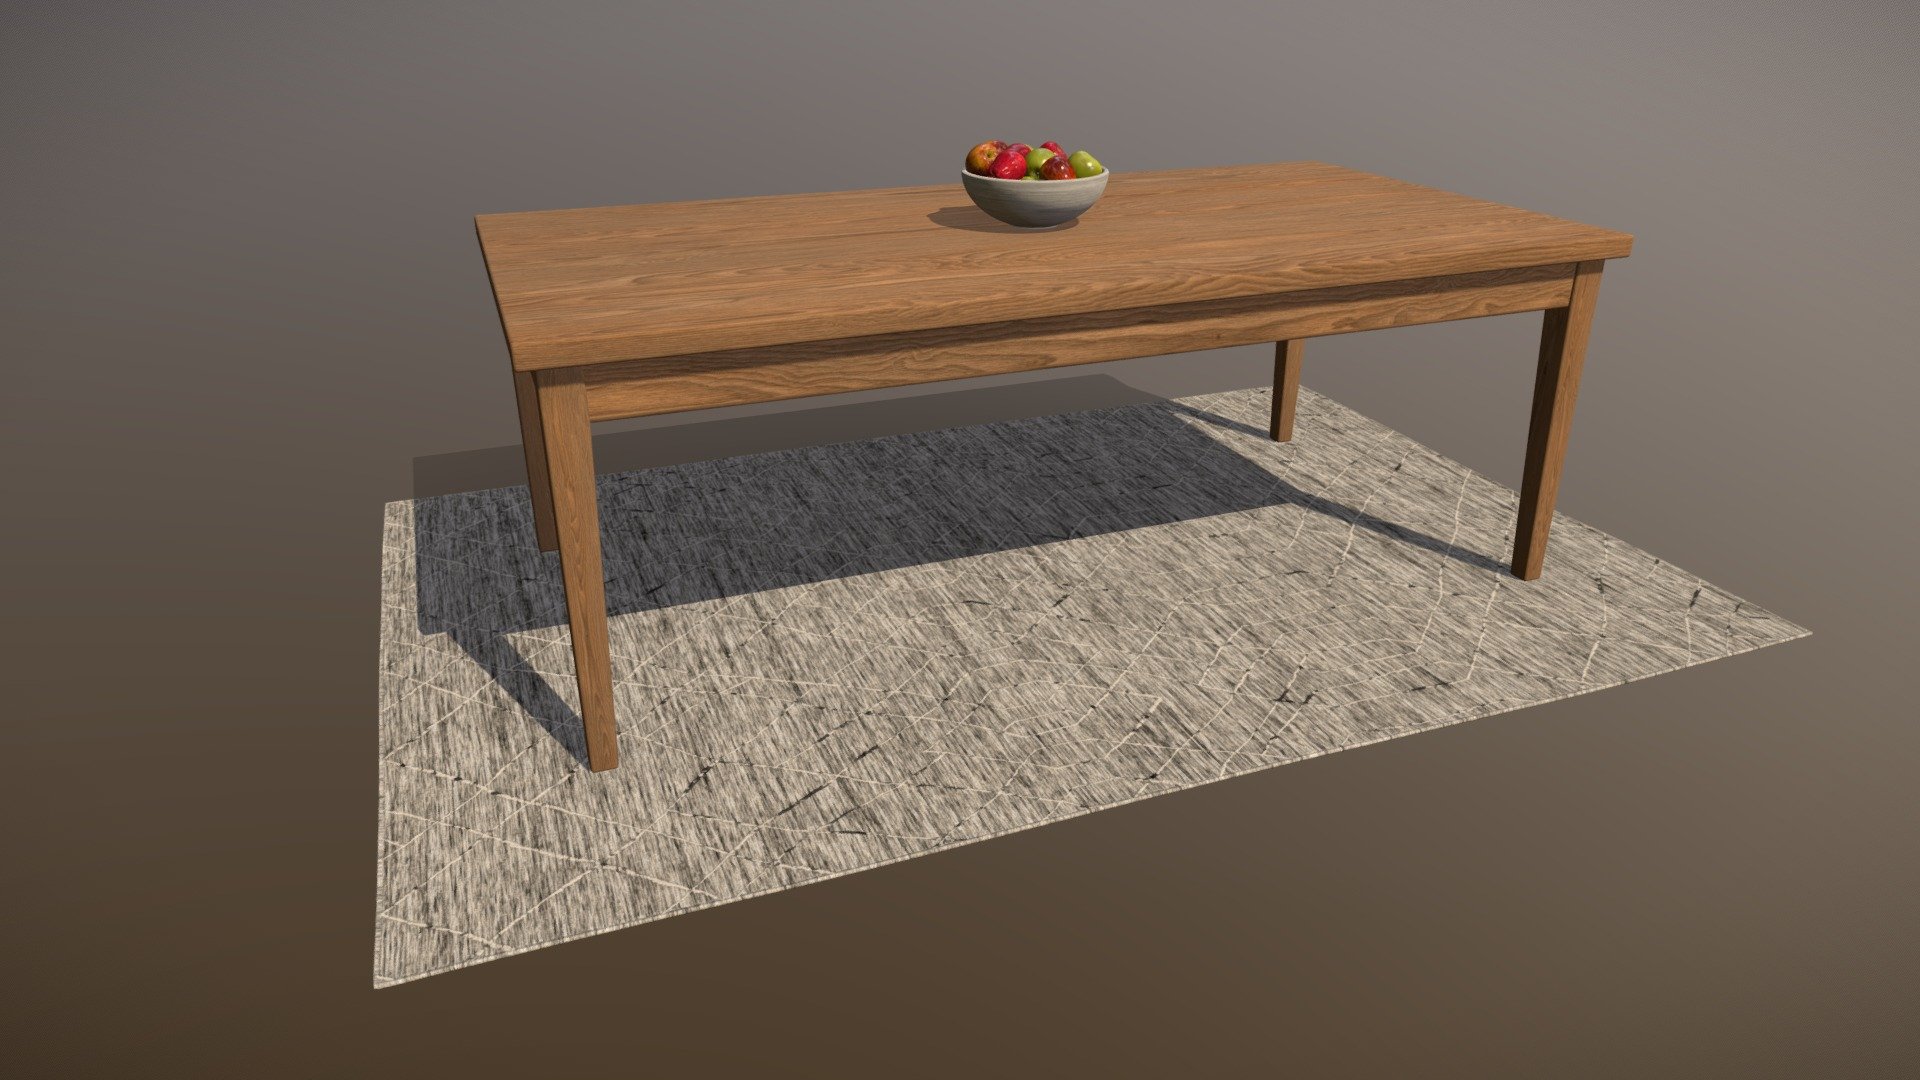 Tapered- Leg Table